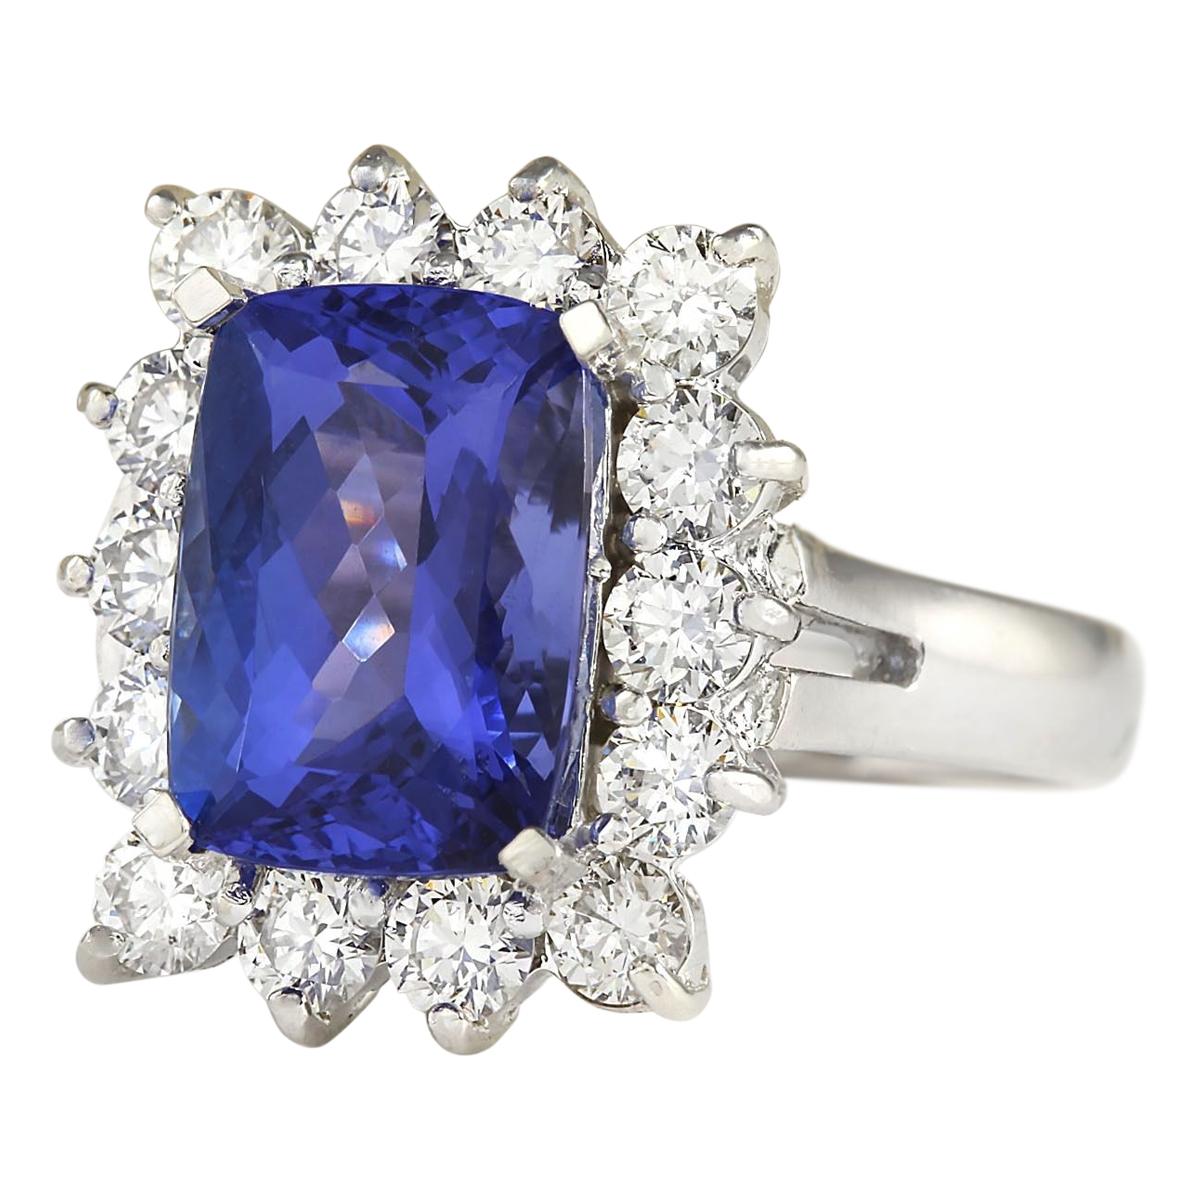 Introducing our stunning 5.88 Carat Tanzanite 14 Karat White Gold Diamond Ring. Crafted from stamped 14K White Gold, this ring boasts a total weight of 6.4 grams, ensuring both quality and durability. The centerpiece is a captivating Tanzanite